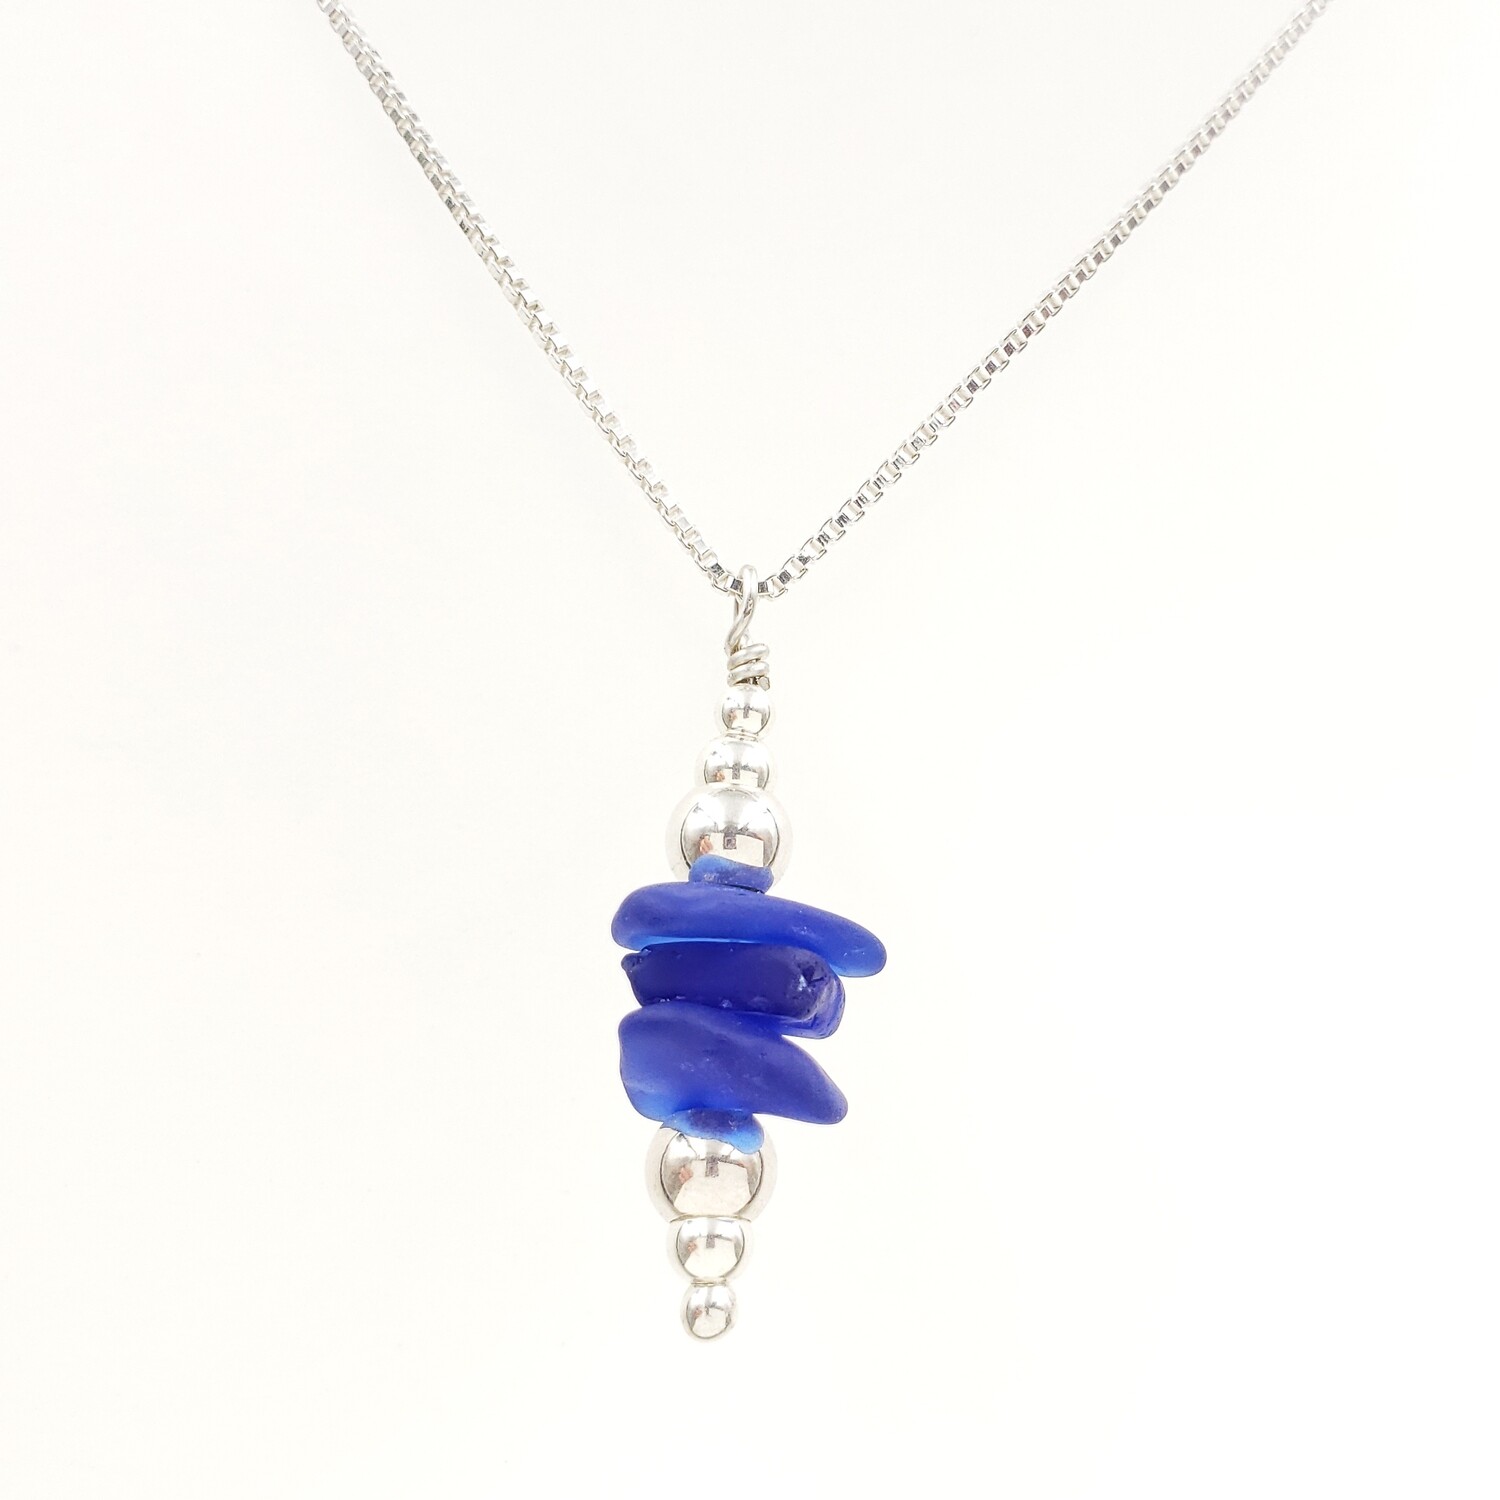 Cobalt Blue Lake Erie Beach Glass Stacking Necklace with Silver Beads